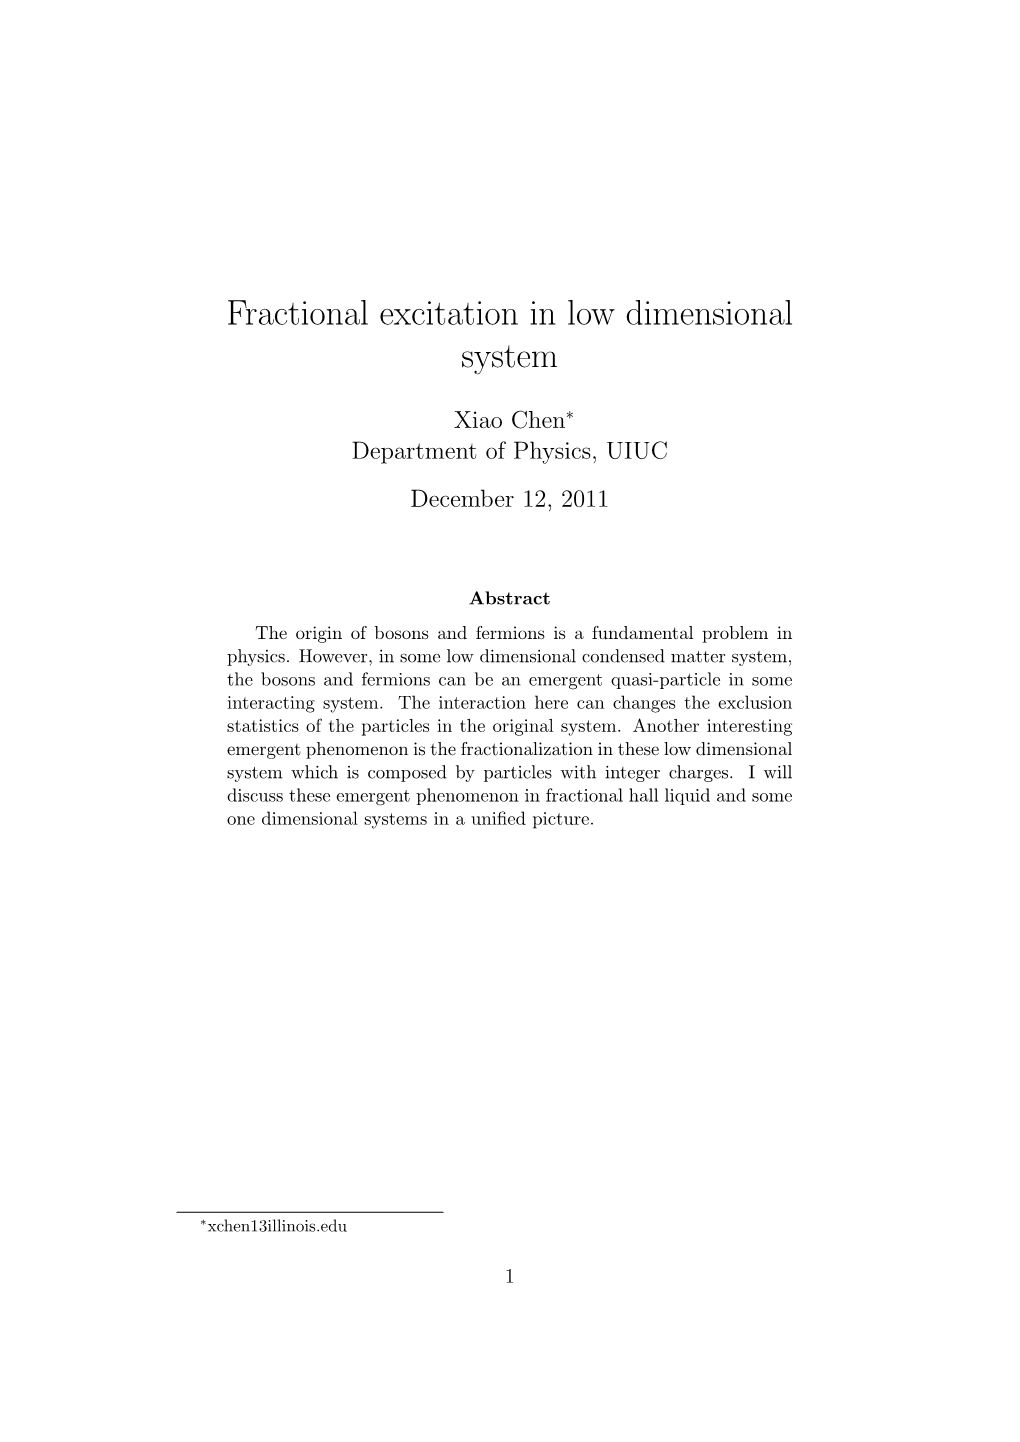 Fractional Excitation in Low Dimensional System